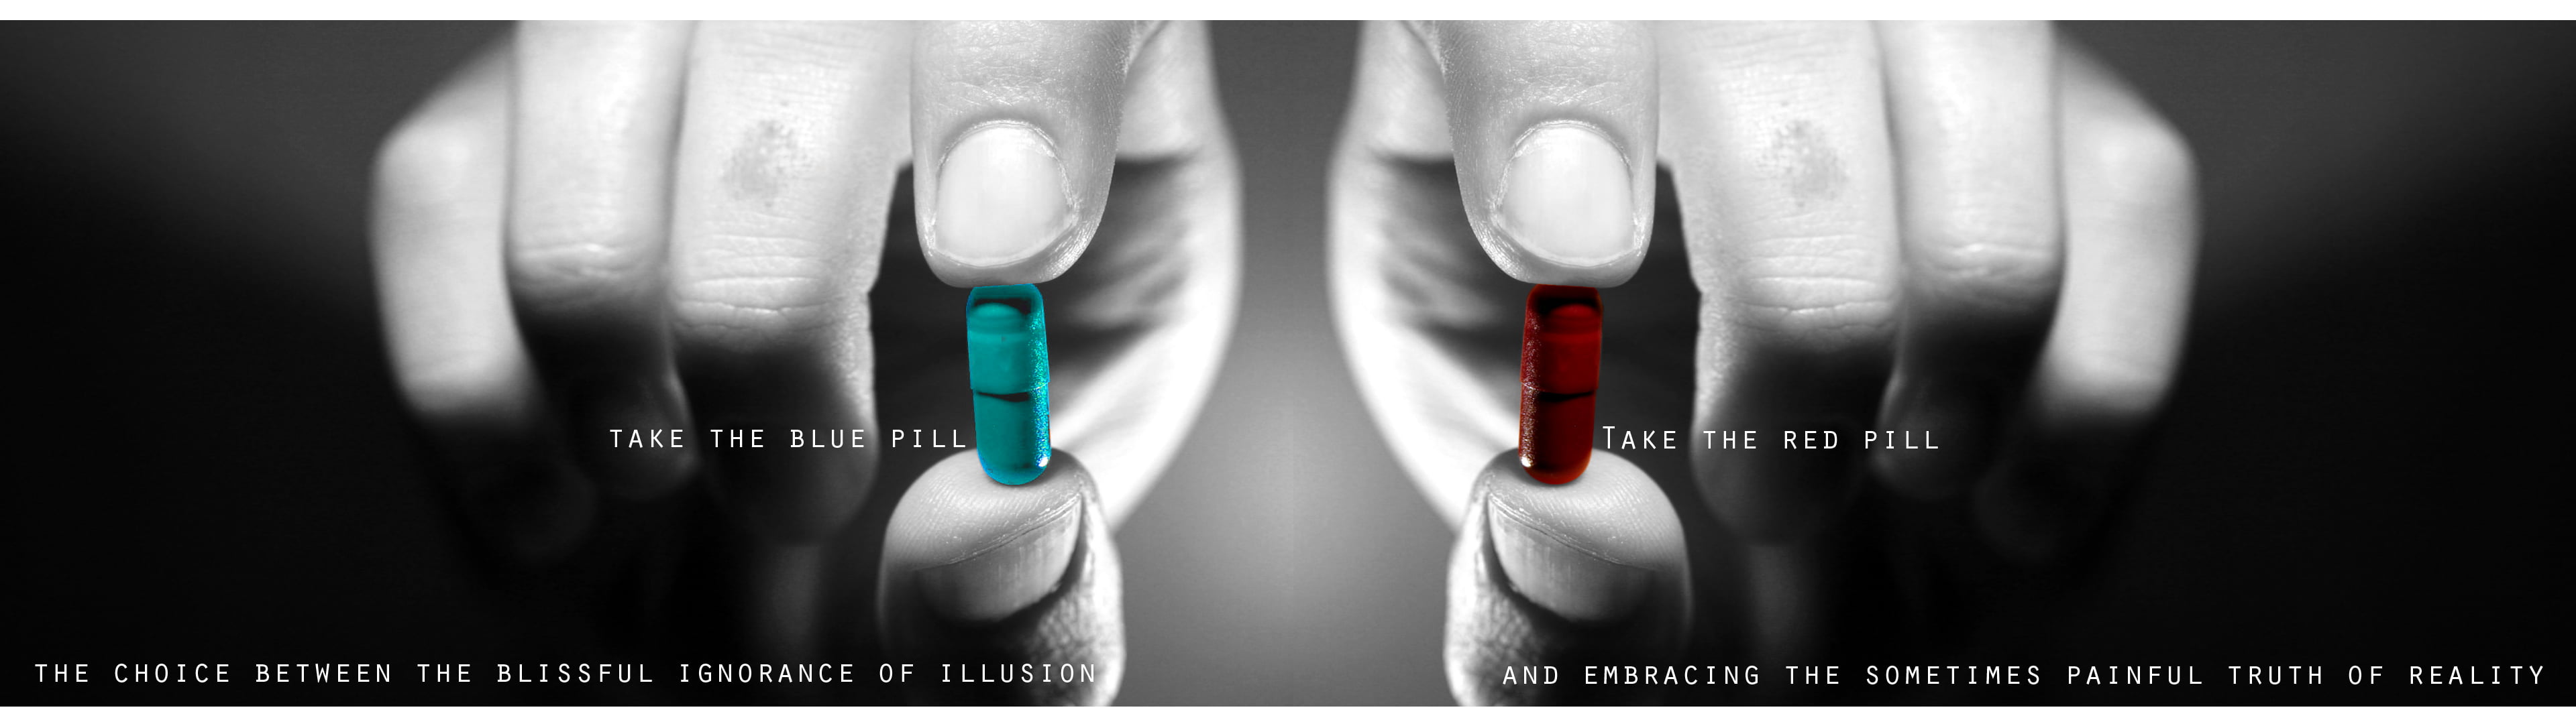 take the blue pill and take the red pill